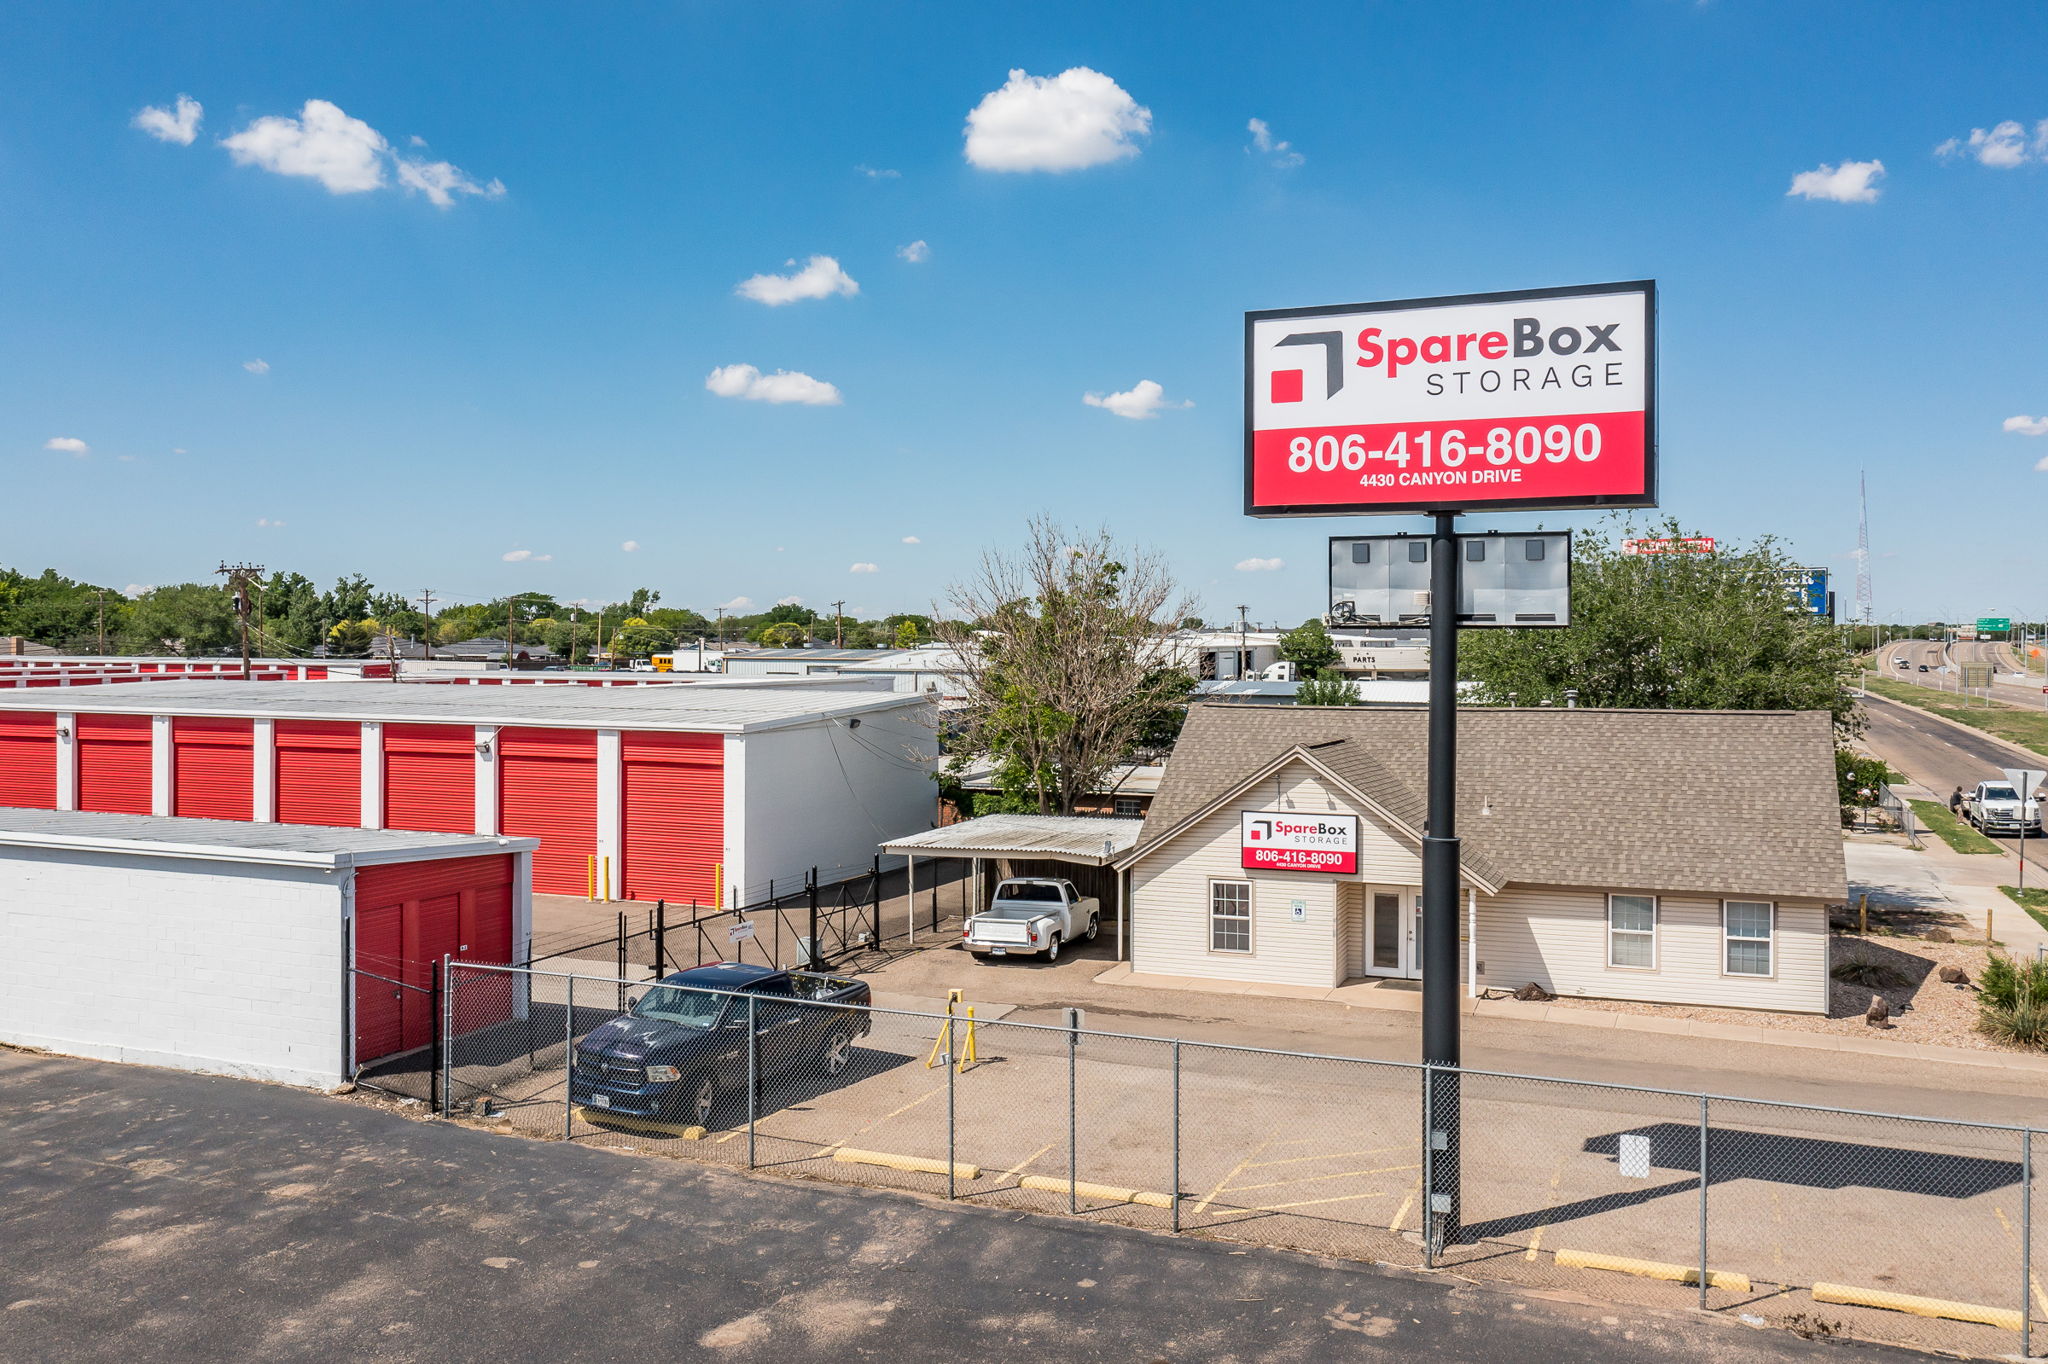 Meet all of your self storage needs in Amarillo, TX at our Canyon Drive location | SpareBox Storage